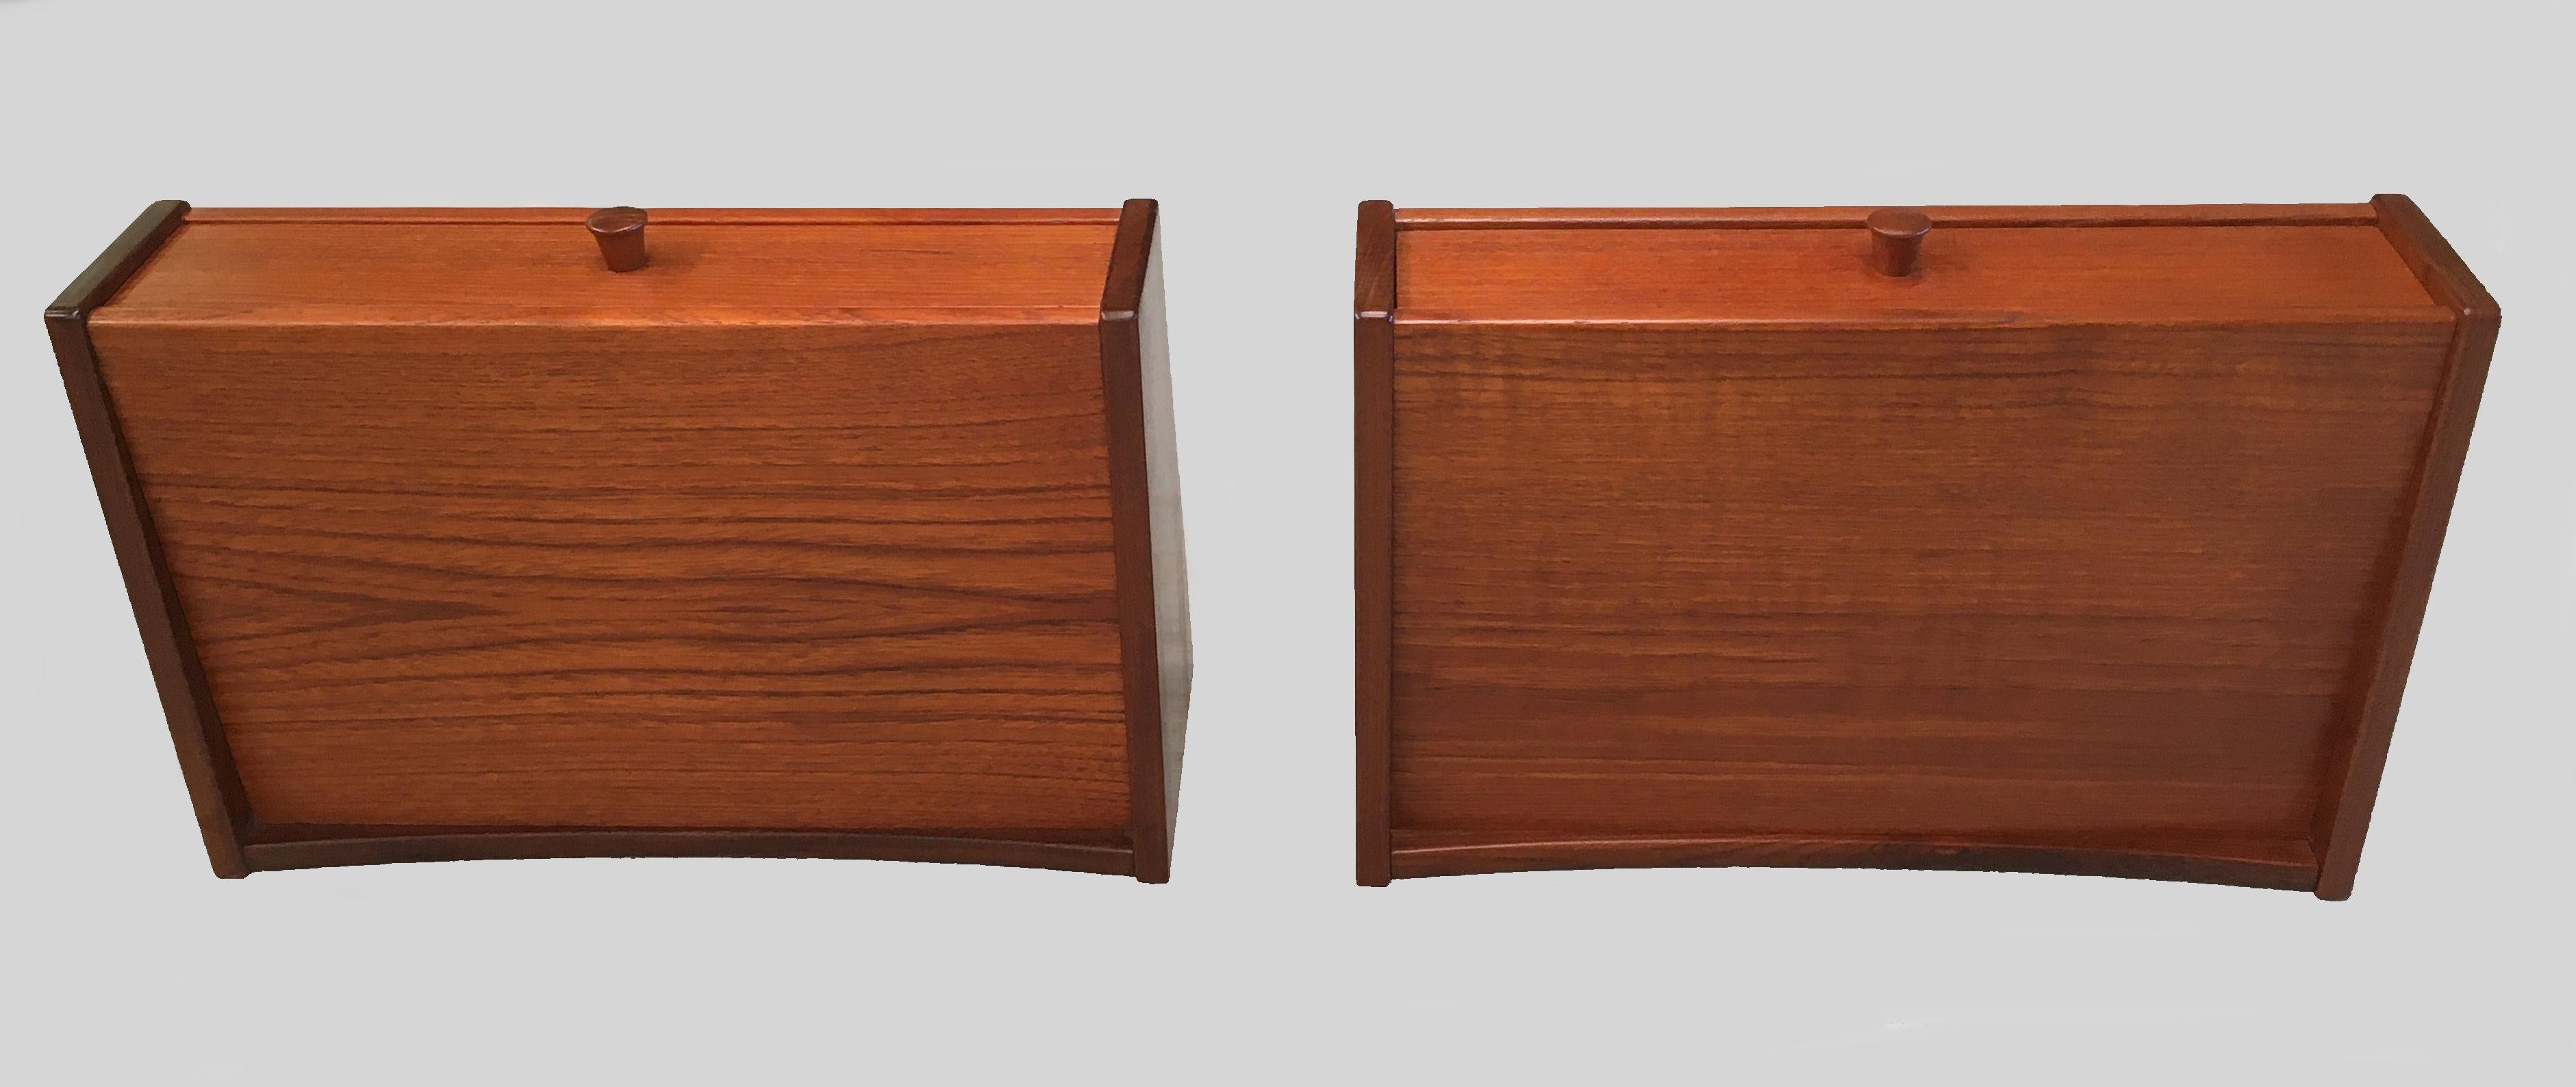 1960s set of two Danish Sigfred Omann floating nightstands in teak by Oelholm

A pair of floating nightstands or shelves in teak, each with a single drawer, designed by Sigfred Omann for Ølholm Møbelfabrik 

The nightstands have been checked and